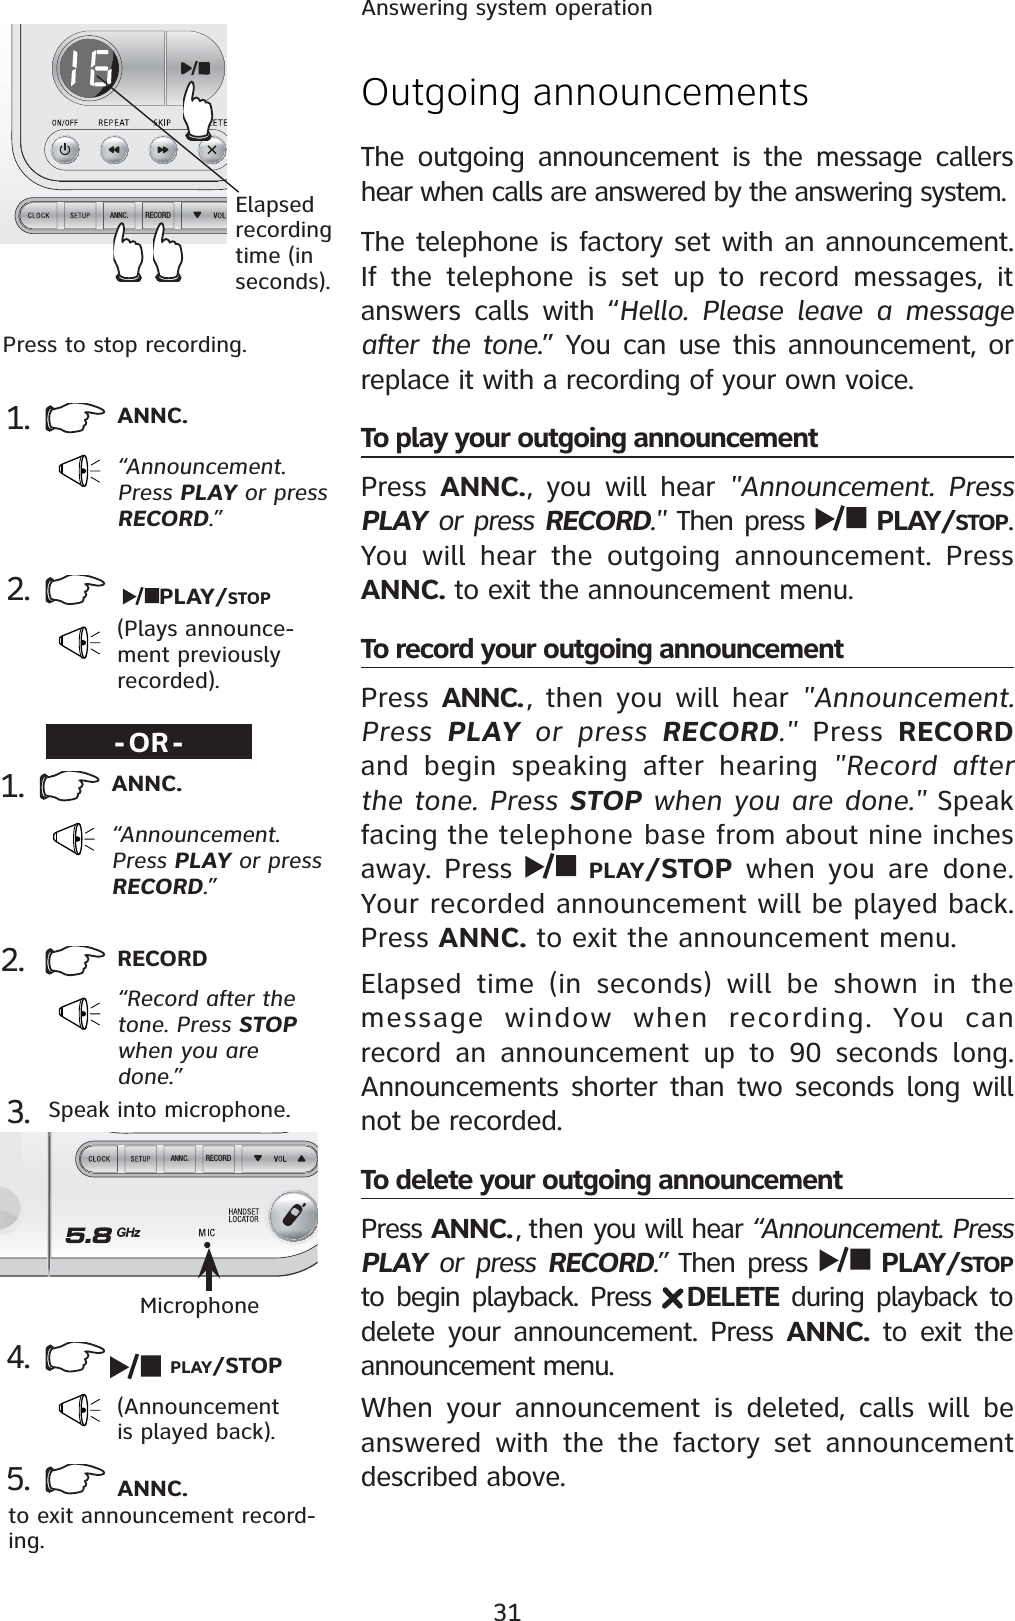 31Answering system operationRECORDANNC.RECORDANNC.Outgoing announcementsThe outgoing announcement is the message callers hear when calls are answered by the answering system.The telephone is factory set with an announcement. If the telephone is set up to record messages, it answers calls with “Hello. Please leave a message after the tone.” You can use this announcement, or replace it with a recording of your own voice.To play your outgoing announcementPress  ANNC., you will hear &quot;Announcement. Press PLAY or press RECORD.&quot; Then press  PLAY/STOP.You will hear the outgoing announcement. Press ANNC. to exit the announcement menu. To record your outgoing announcementPress ANNC. , then you will hear &quot;Announcement. Press  PLAY or press RECORD.&quot; Press RECORDand begin speaking after hearing &quot;Record after the tone. Press STOP when you are done.&quot; Speak facing the telephone base from about nine inches away. Press  PLAY/STOP when you are done. Your recorded announcement will be played back. Press ANNC. to exit the announcement menu.Elapsed time (in seconds) will be shown in the message window when recording. You can record an announcement up to 90 seconds long. Announcements shorter than two seconds long will not be recorded.To delete your outgoing announcementPress ANNC.  , then you will hear “Announcement. Press PLAY or press RECORD.” Then press  PLAY/STOPto begin playback. Press  DELETE during playback to delete your announcement. Press ANNC. to exit the announcement menu.When your announcement is deleted, calls will be answered with the the factory set announcement described above.1. ANNC.“Announcement. Press PLAY or press RECORD.”2.(Plays announce-ment previously recorded).-OR-PLAY/STOPElapsedrecording time (in seconds).Press to stop recording.2. RECORD“Record after the tone. Press STOPwhen you are done.”3.4.(Announcement is played back).Speak into microphone.MicrophonePLAY/STOP5. ANNC.to exit announcement record-ing.1. ANNC.“Announcement. Press PLAY or press RECORD.”